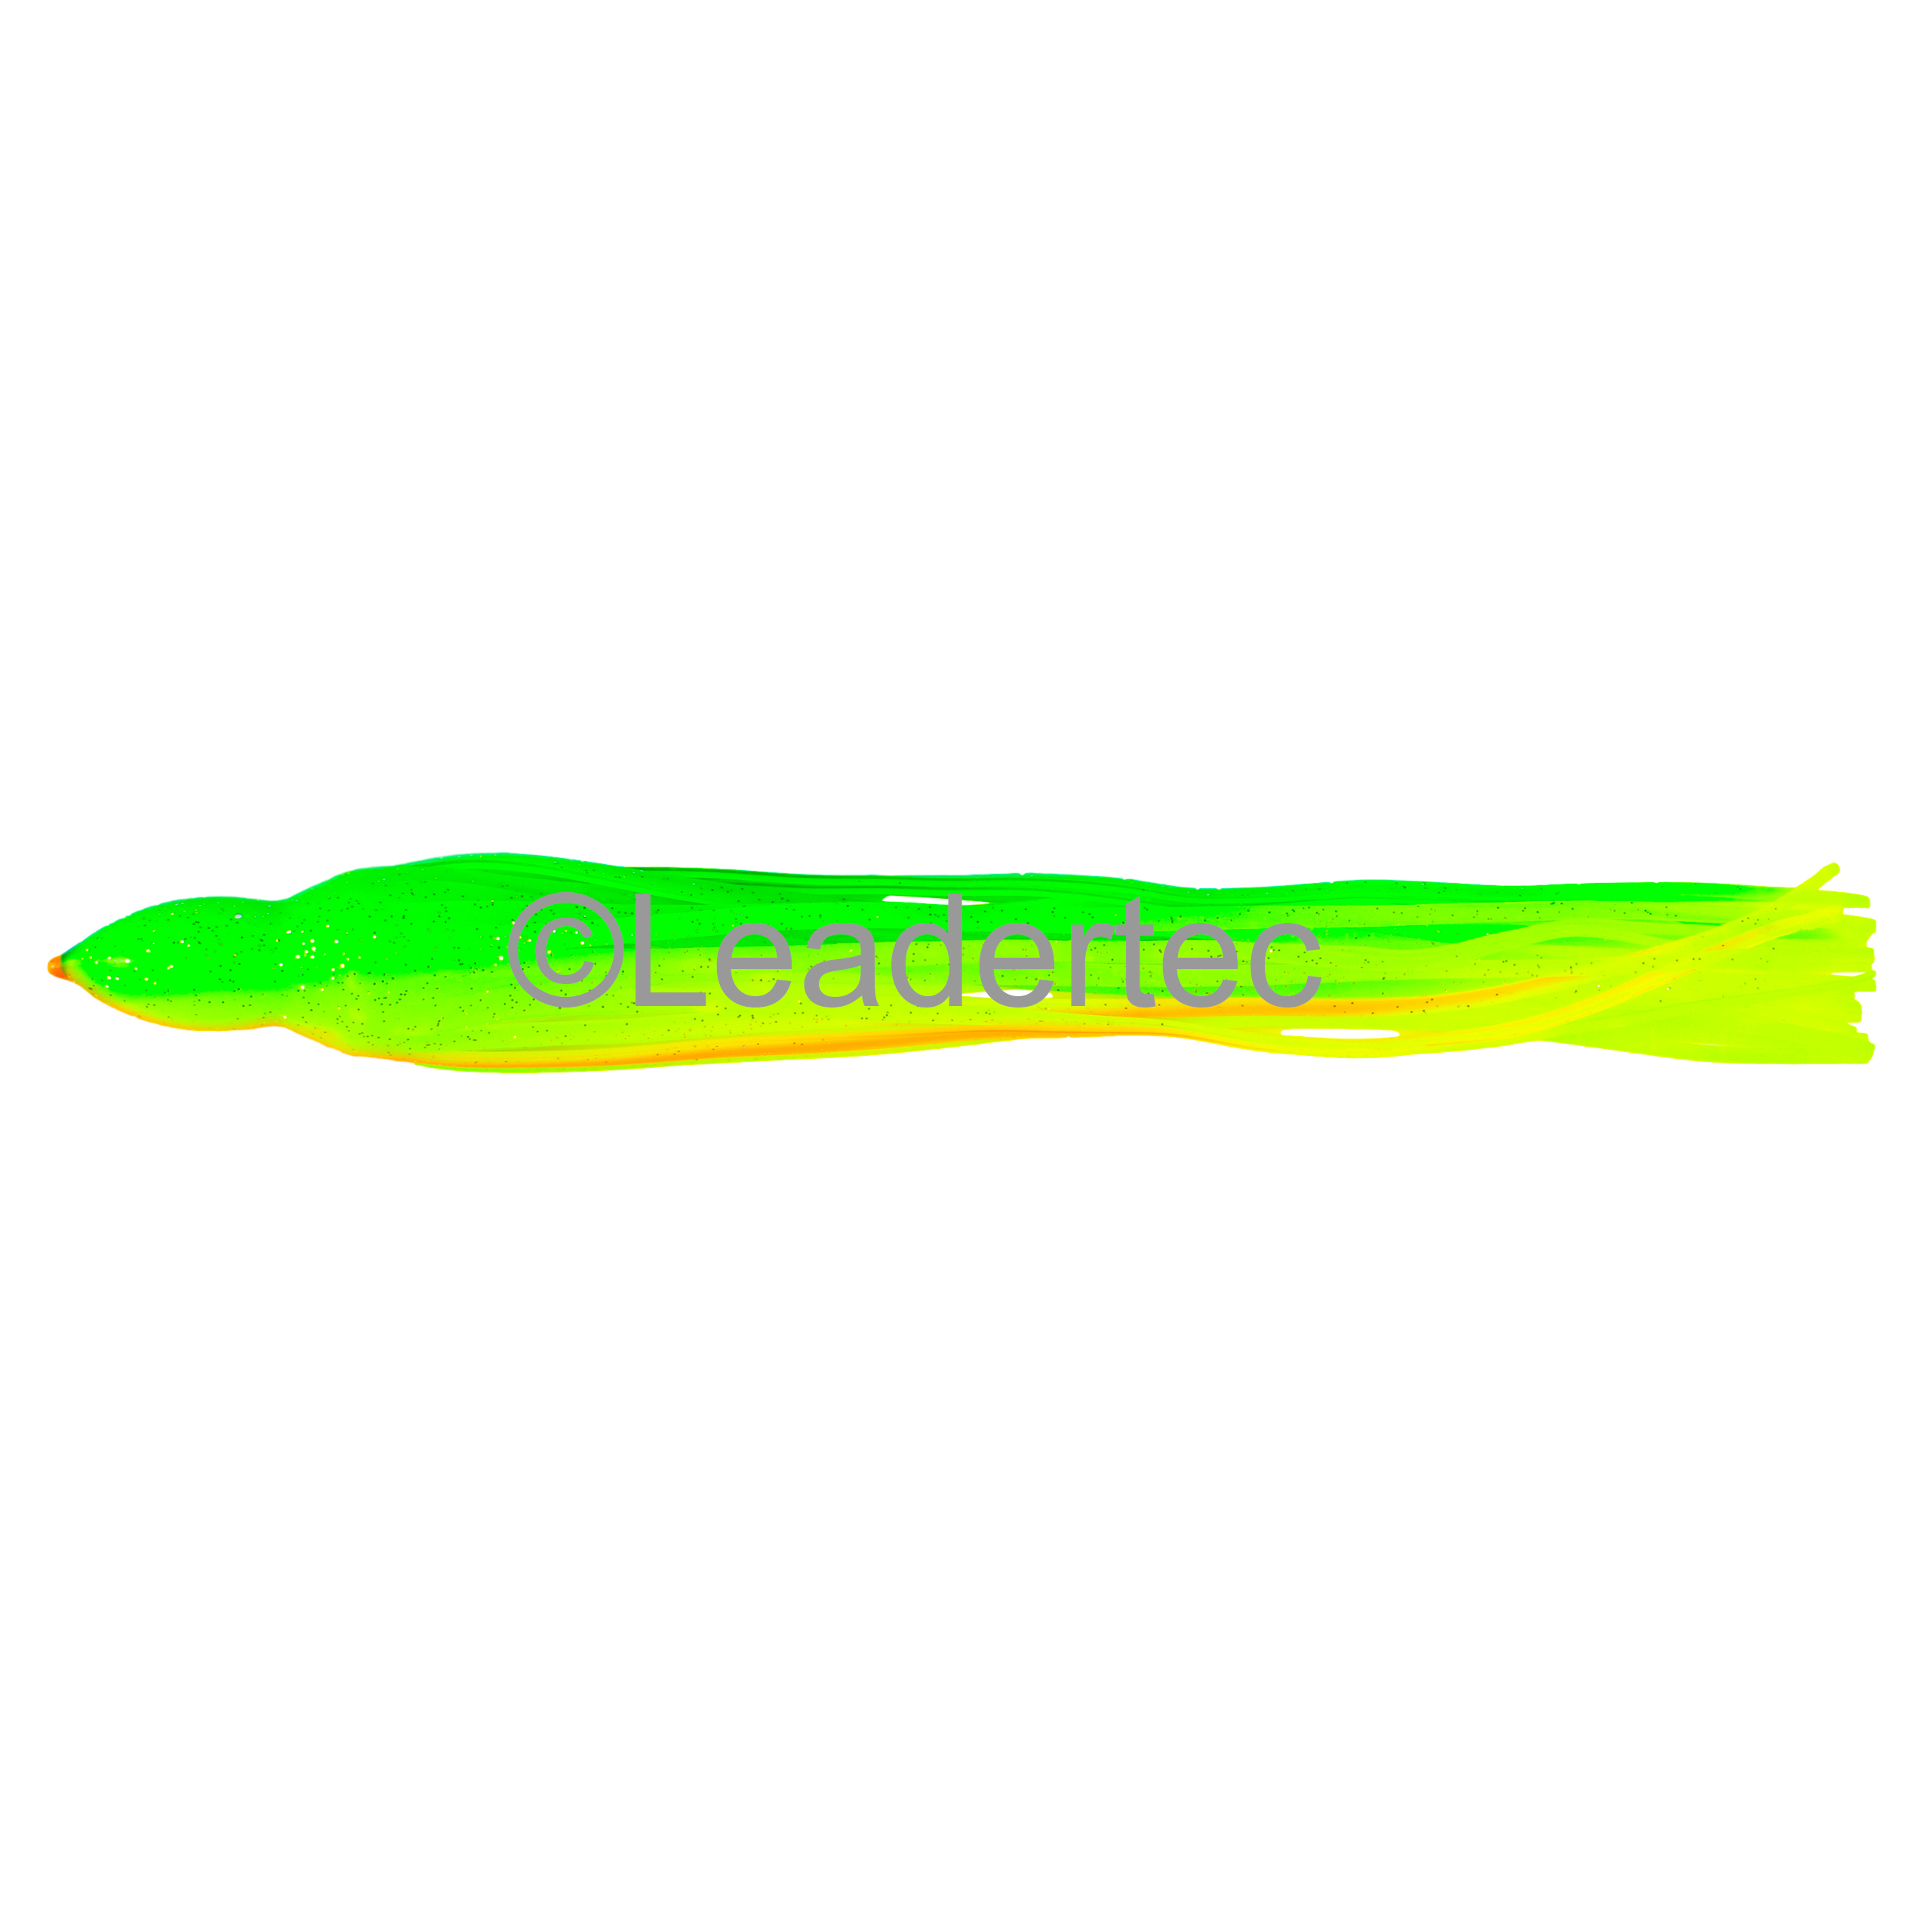 Re-skirting trolling lures - The Fishing Website